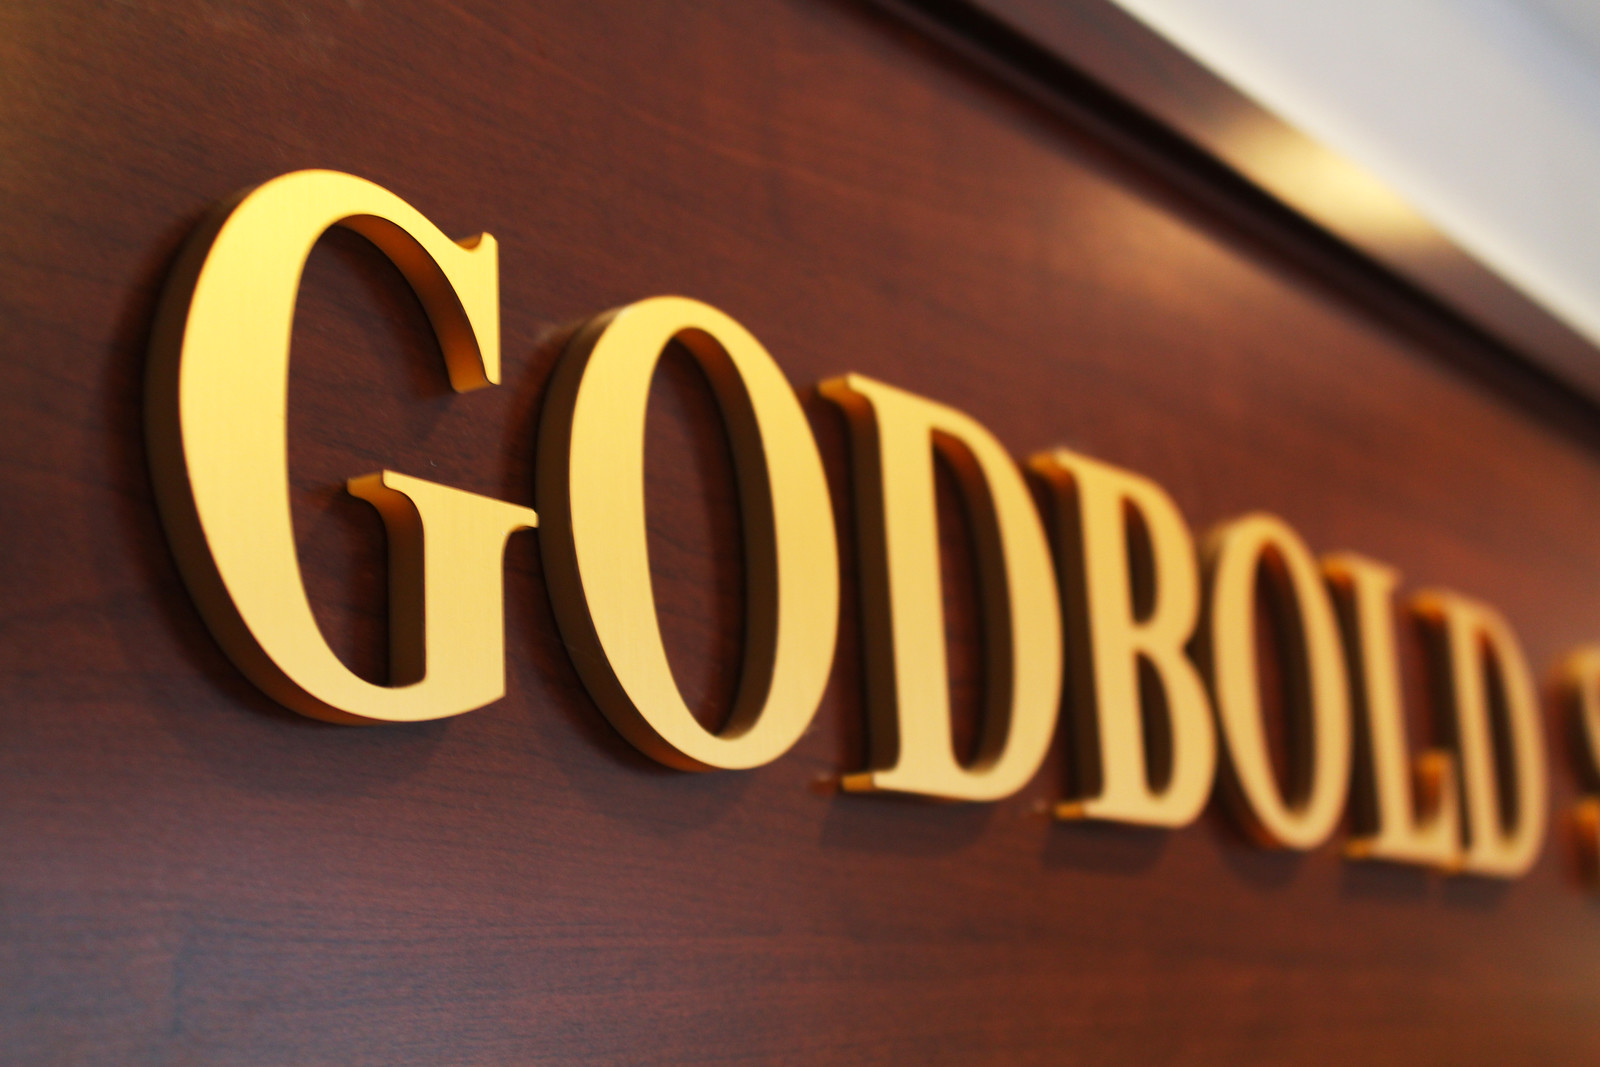 a photo of the Godbold sign in the School of Business